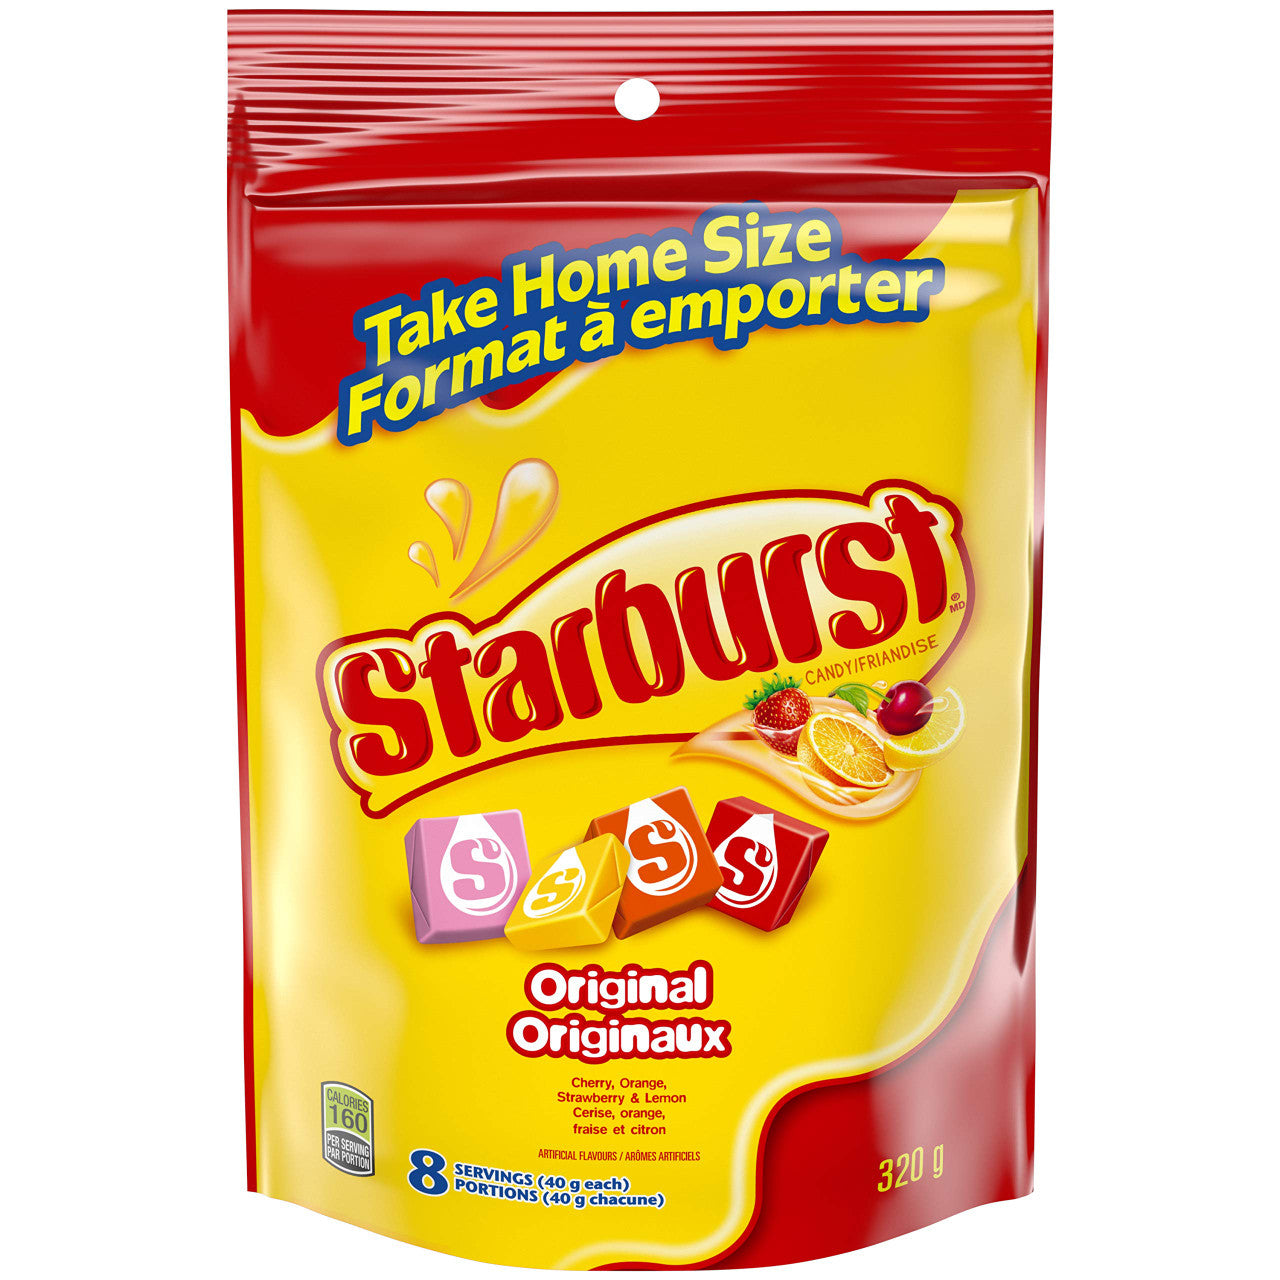 Starburst Original Fruit Chews Candy, Stand Up Pouch, 320g/11.3oz, (Imported from Canada)